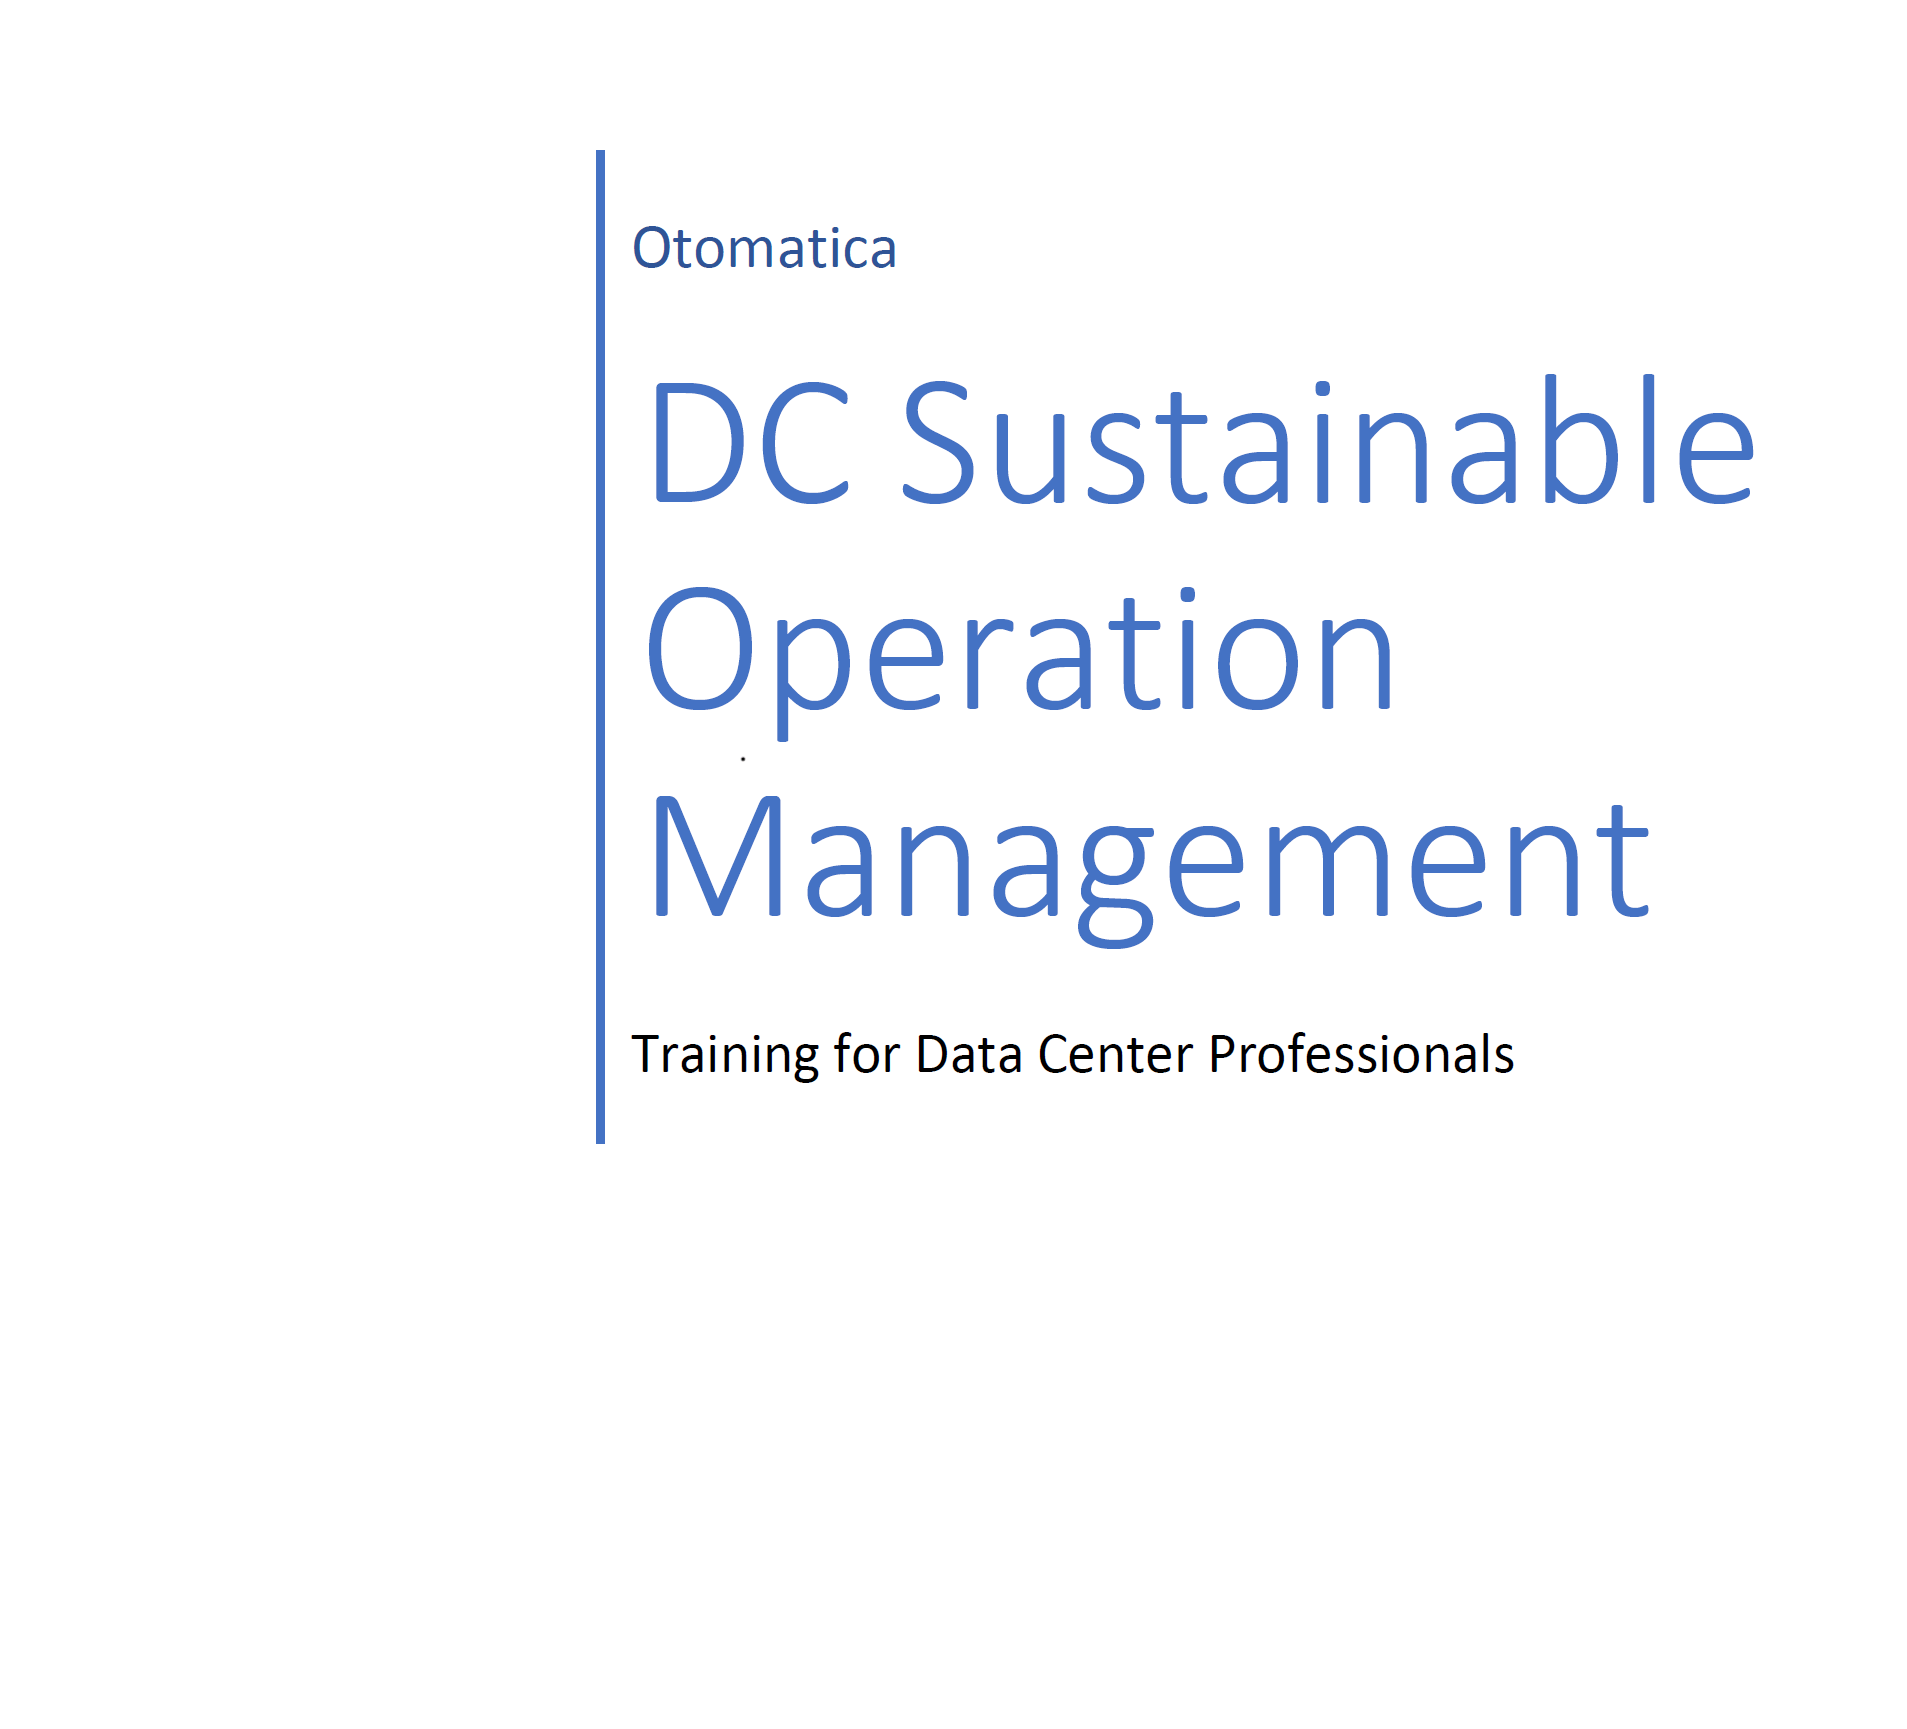 https://otomatica.com/wp-content/uploads/2022/03/DC-Sustainable-Operation1.png